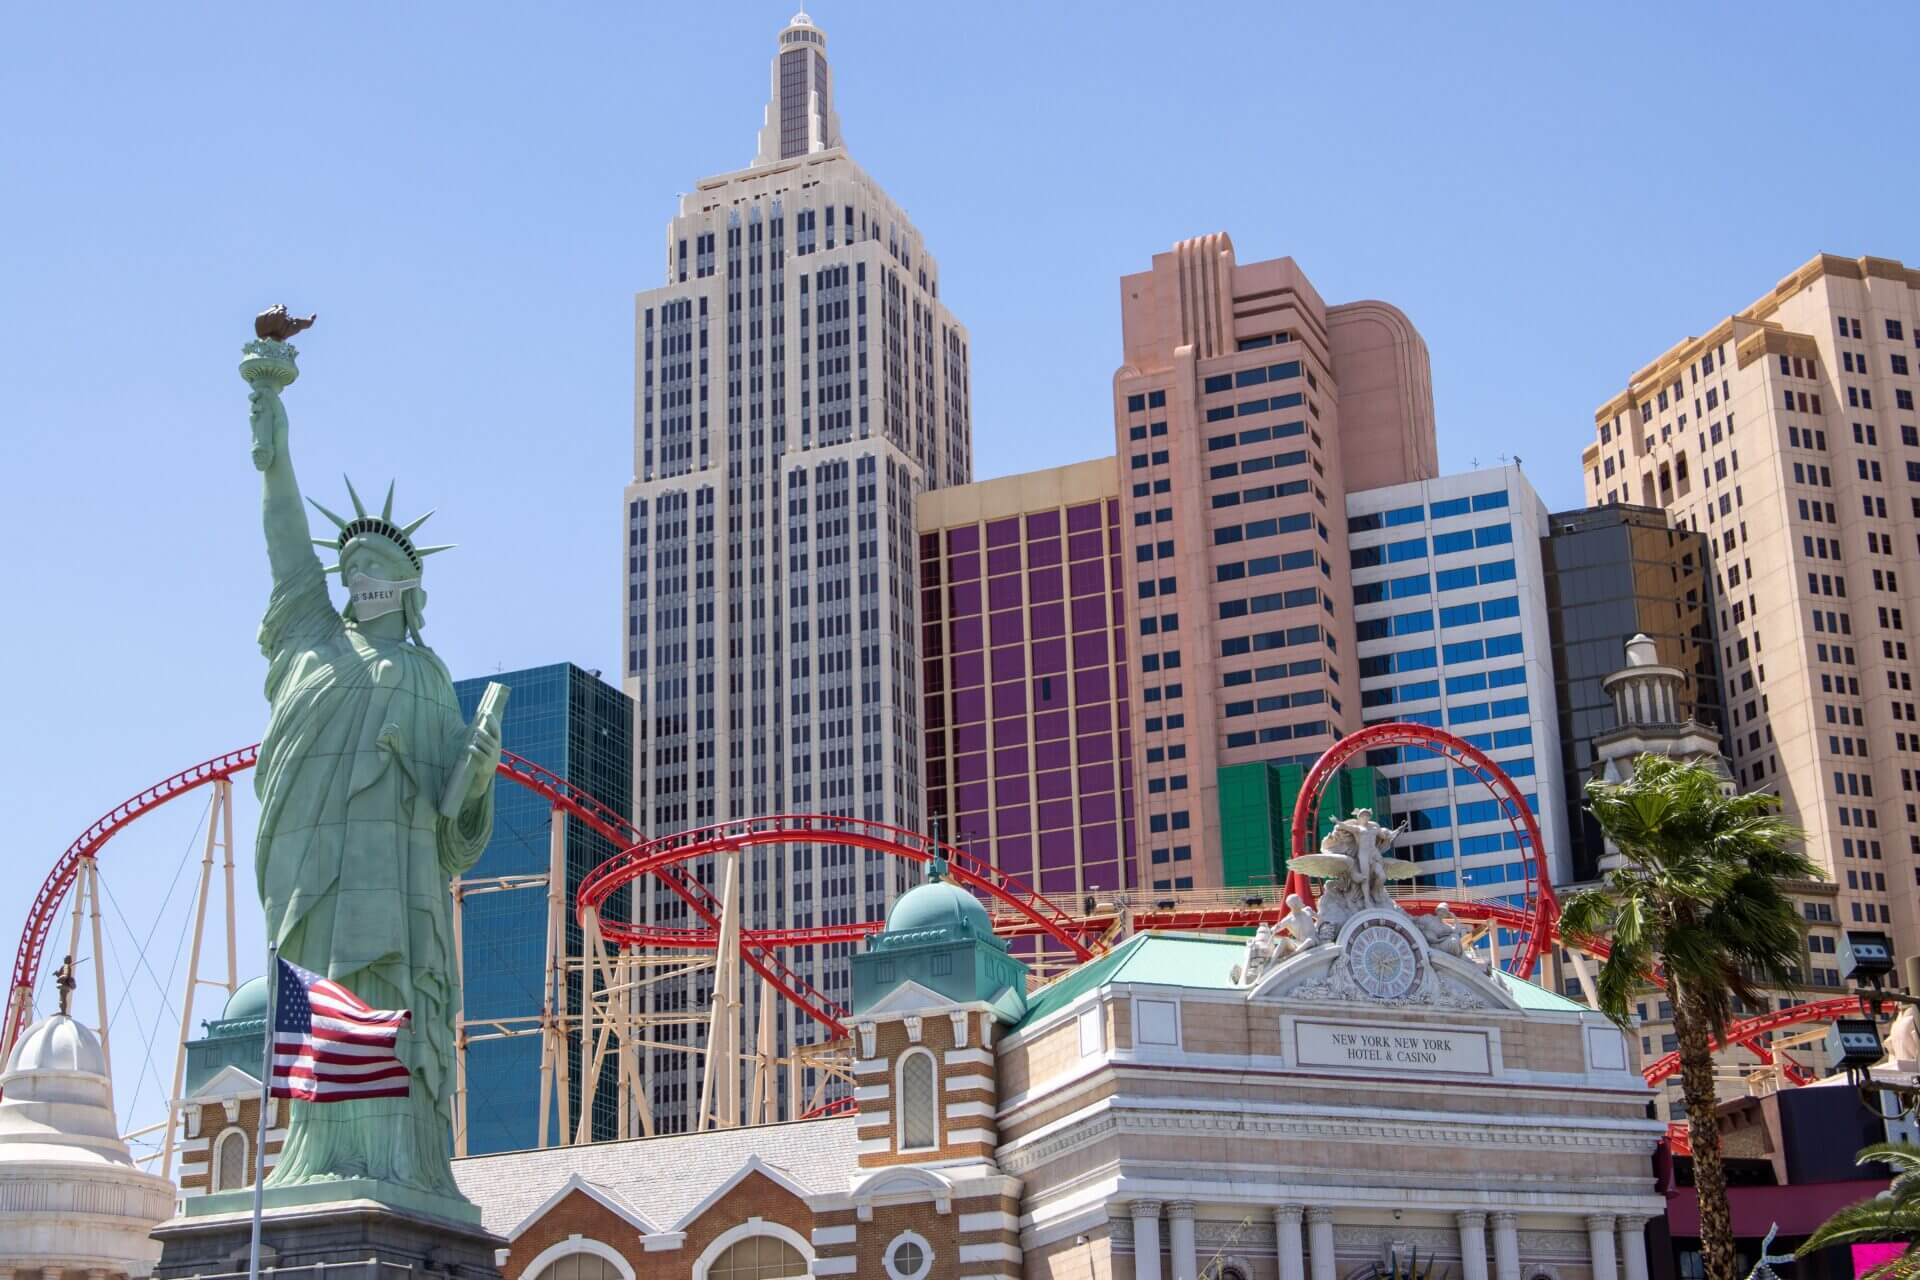 What To Do On Memorial Day Weekend In Las Vegas?